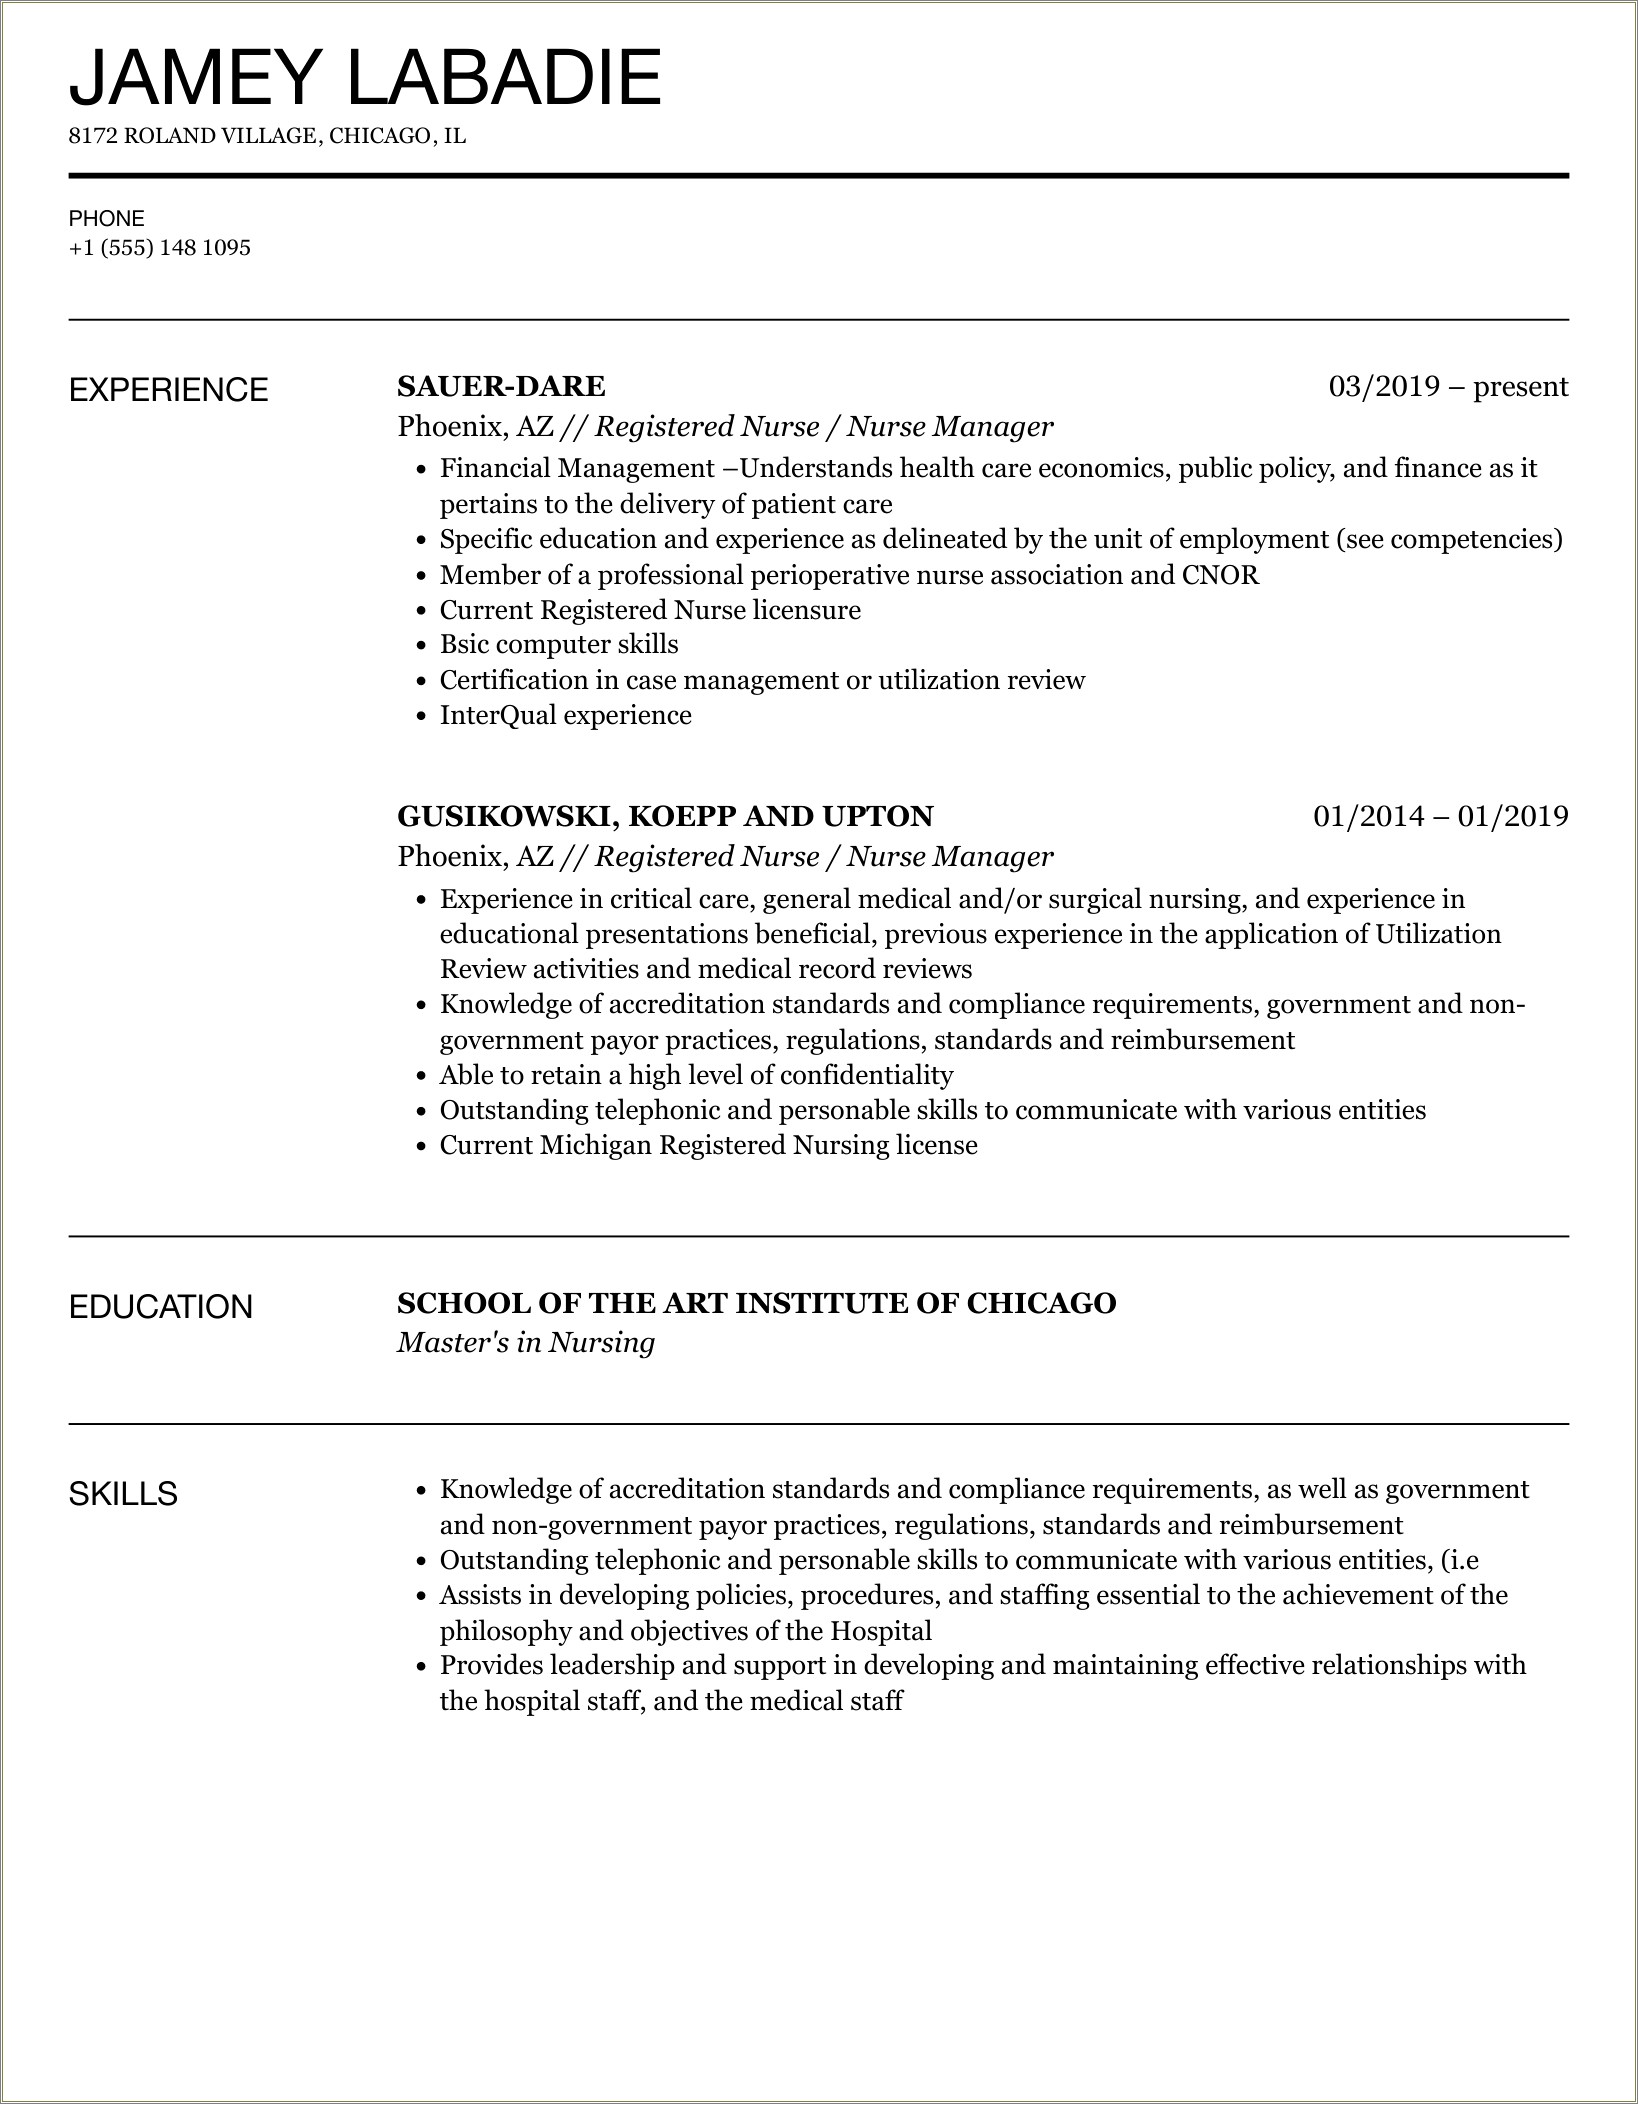 Registered Nurse To Assistant Nurse Manager Resume Examples